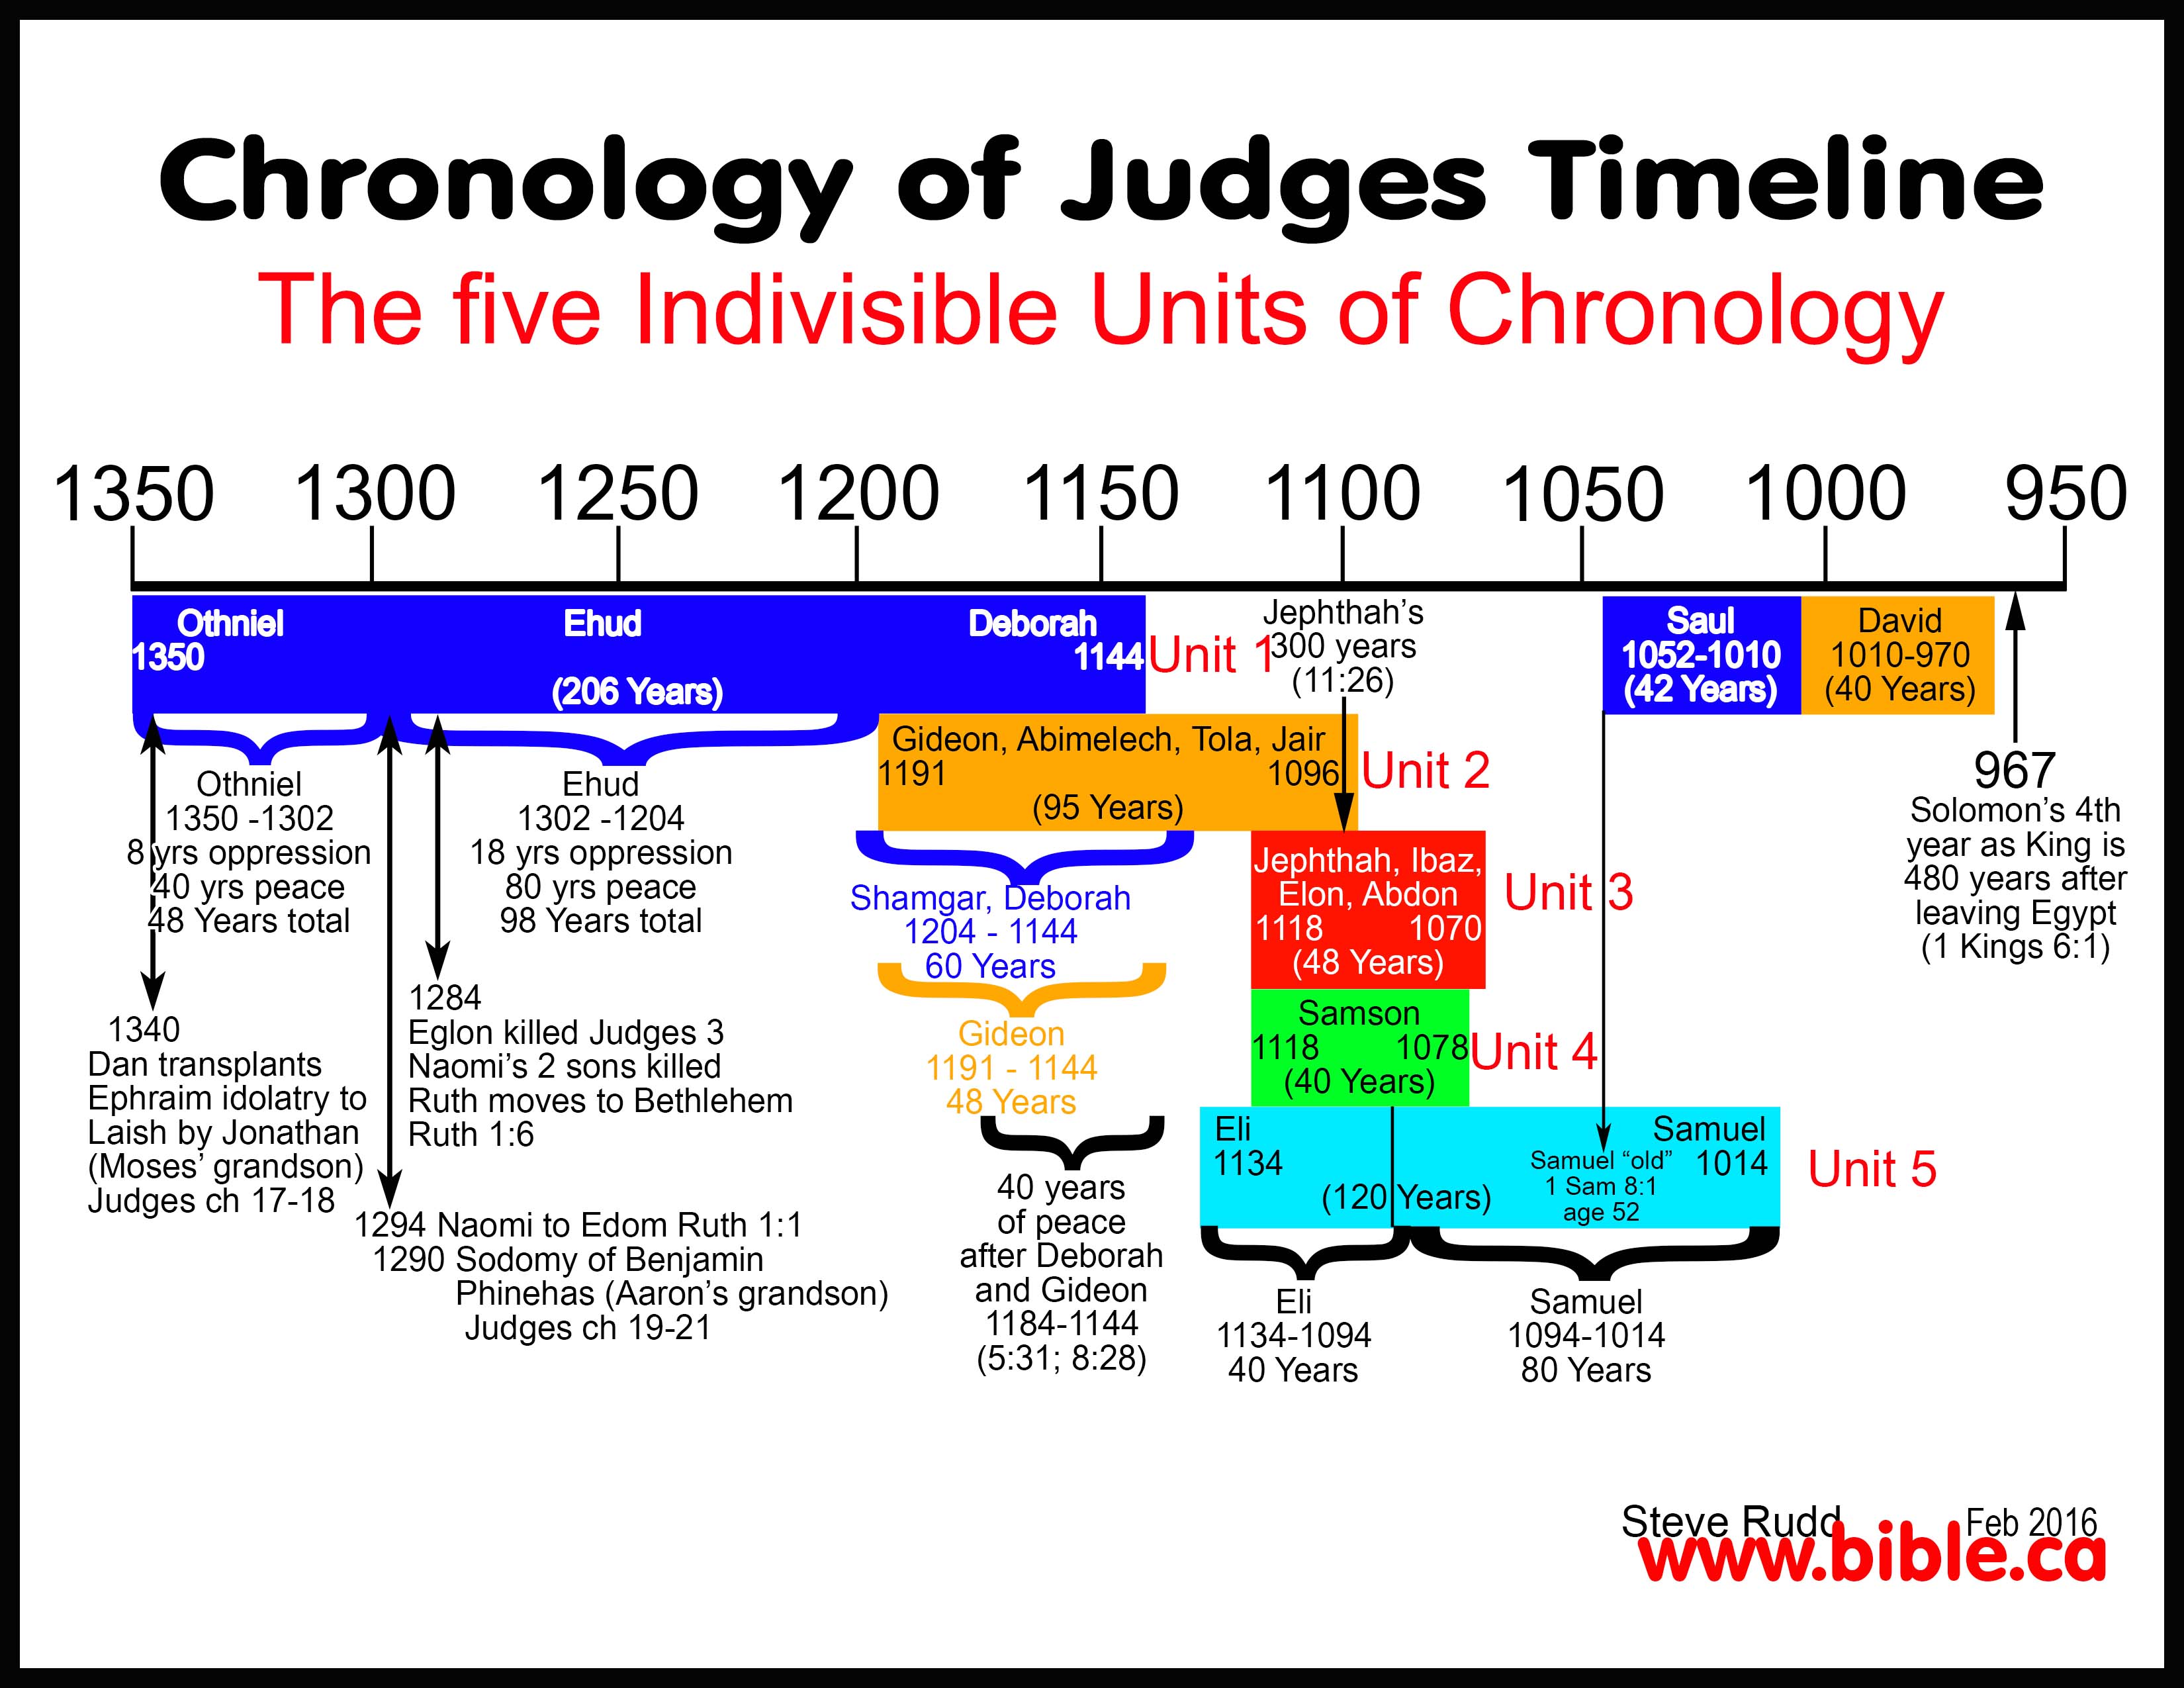 bible-archeology-exodus-route-date-chronology-of-judges-1350-1004bc.jpg